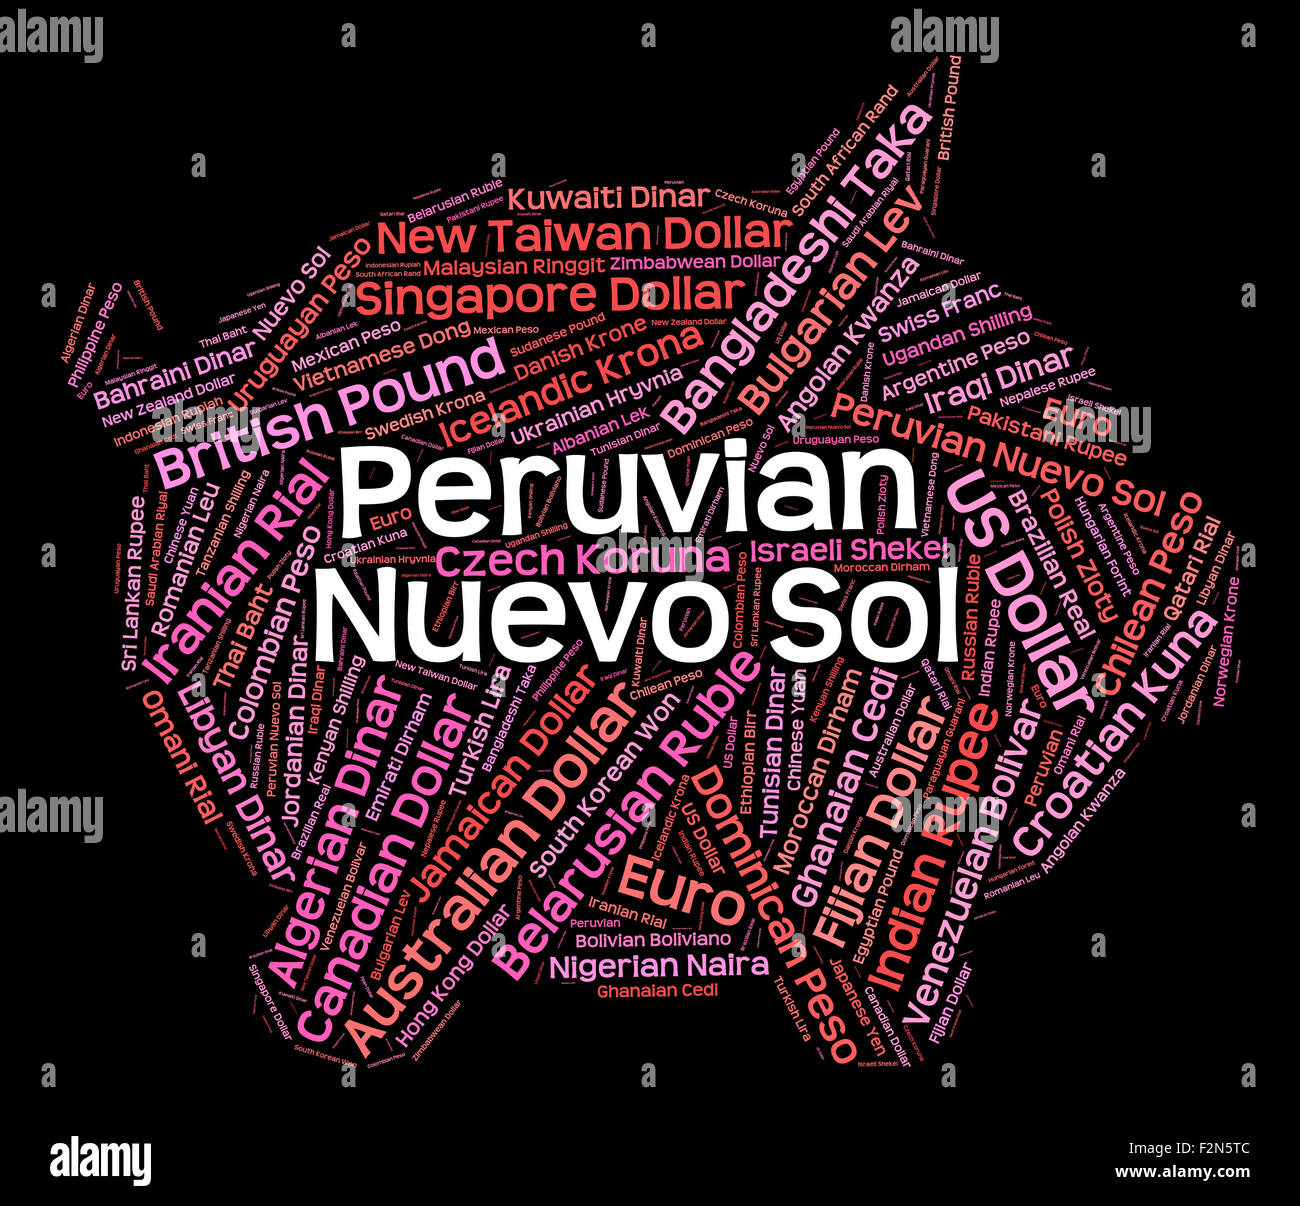 Peruvian Nuevo Sol Meaning Worldwide Trading And Fx Stock Photo - 